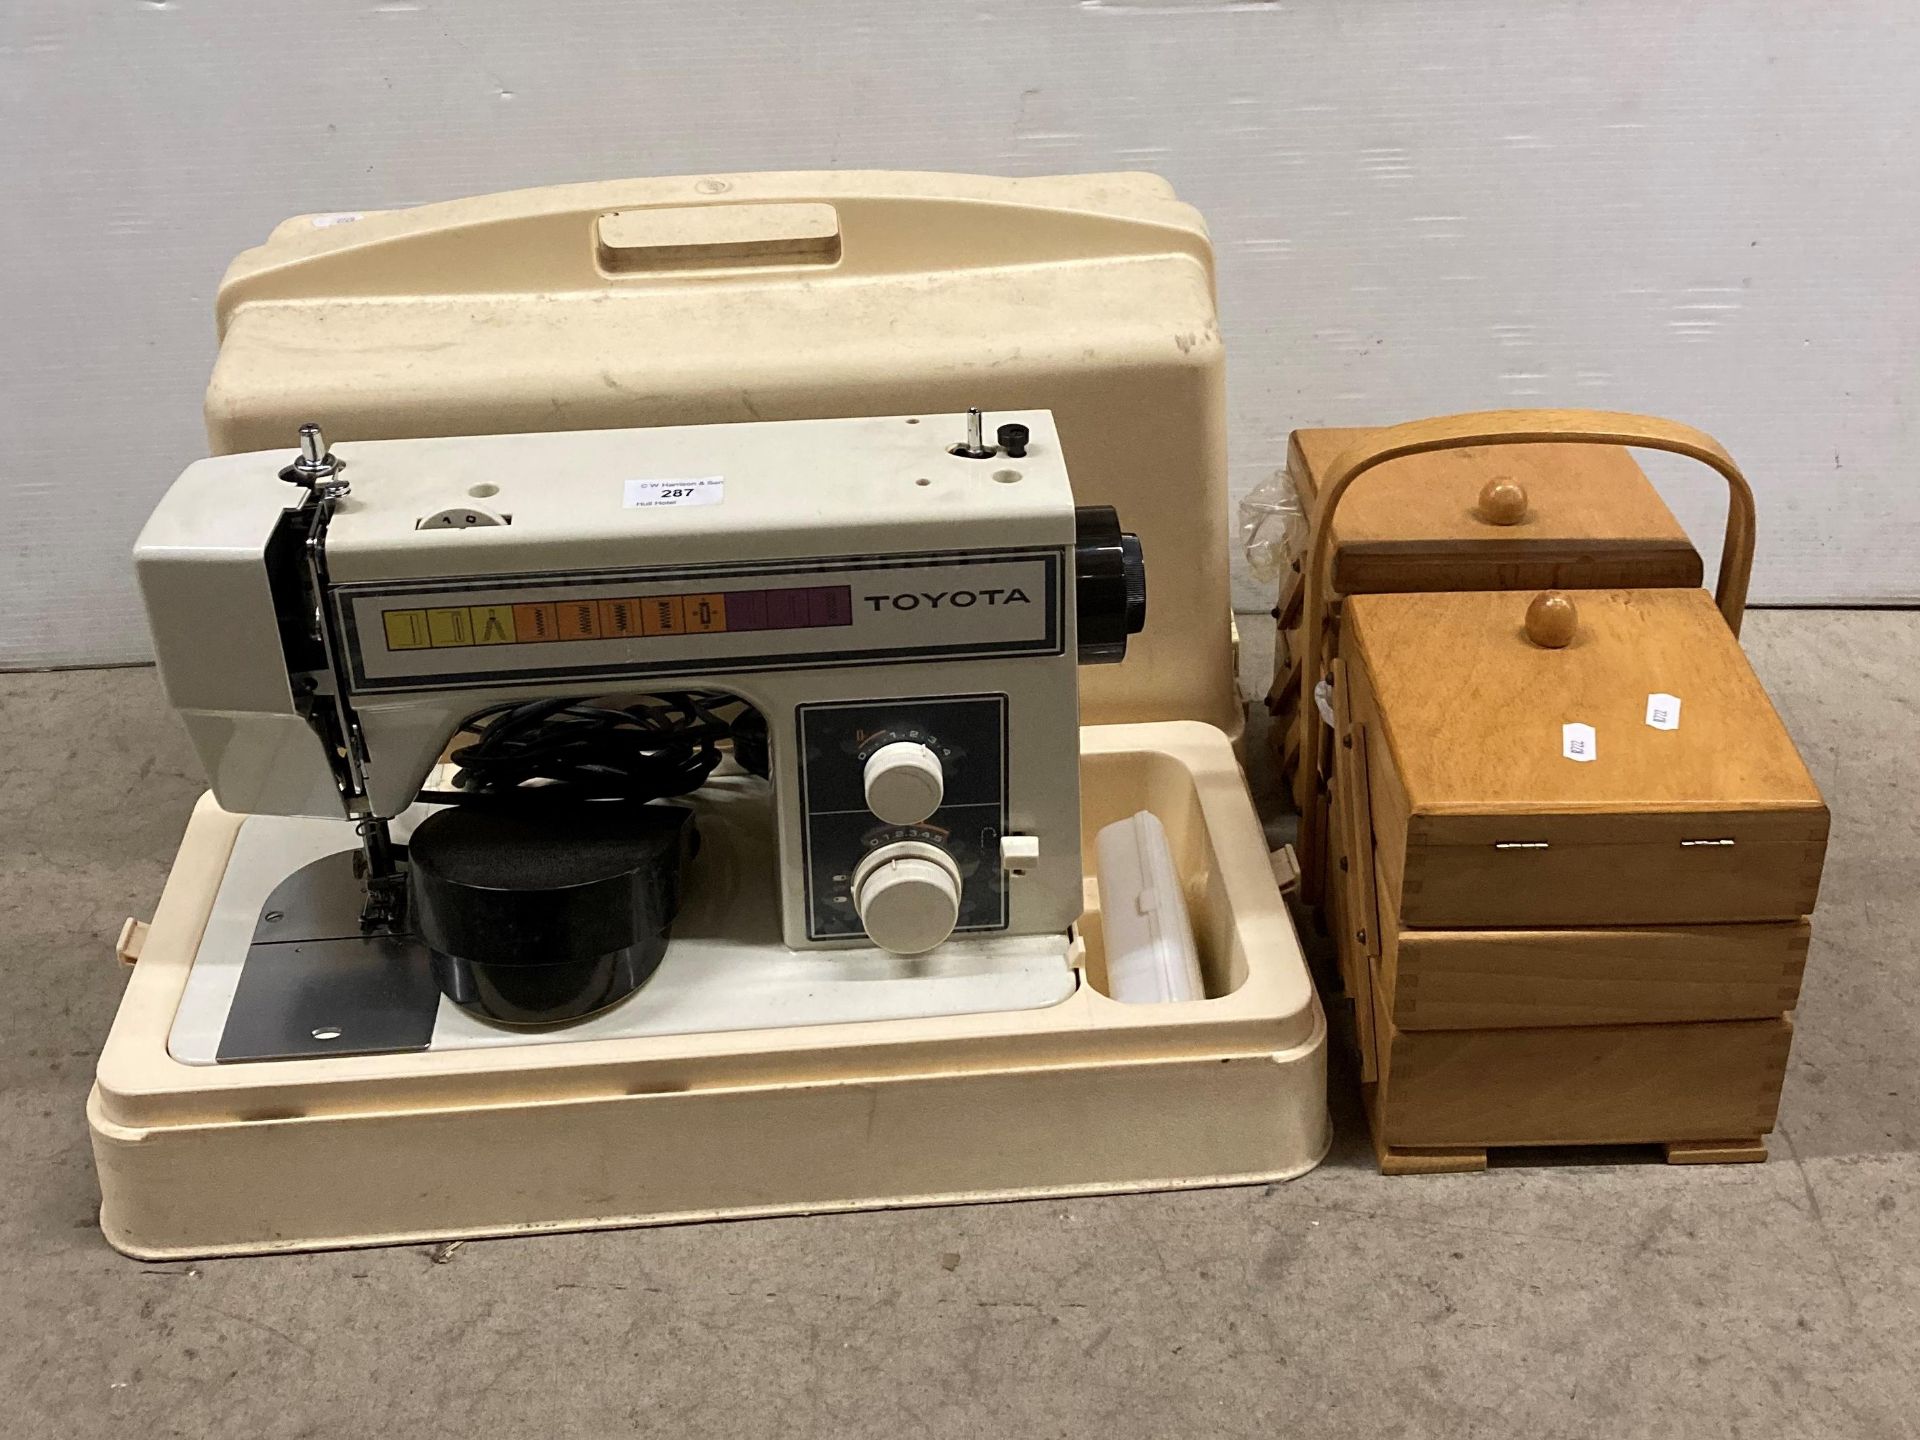 Toyota electric foot-operated sewing machine in carrying case - model: 222 - and a wooden